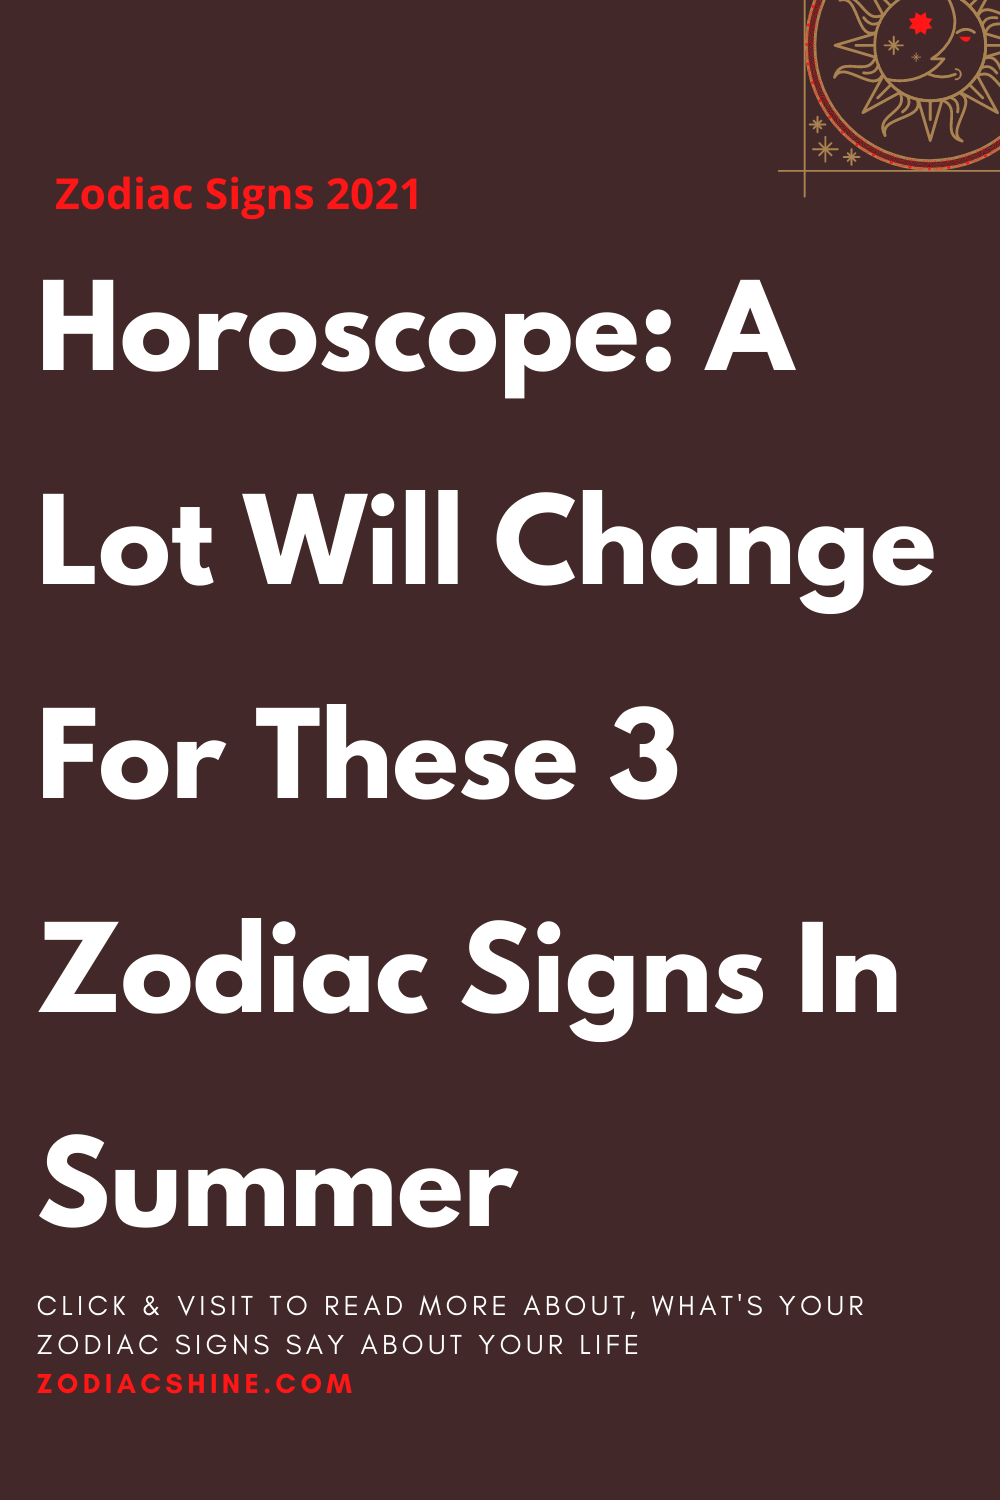 Horoscope: A Lot Will Change For These 3 Zodiac Signs In Summer